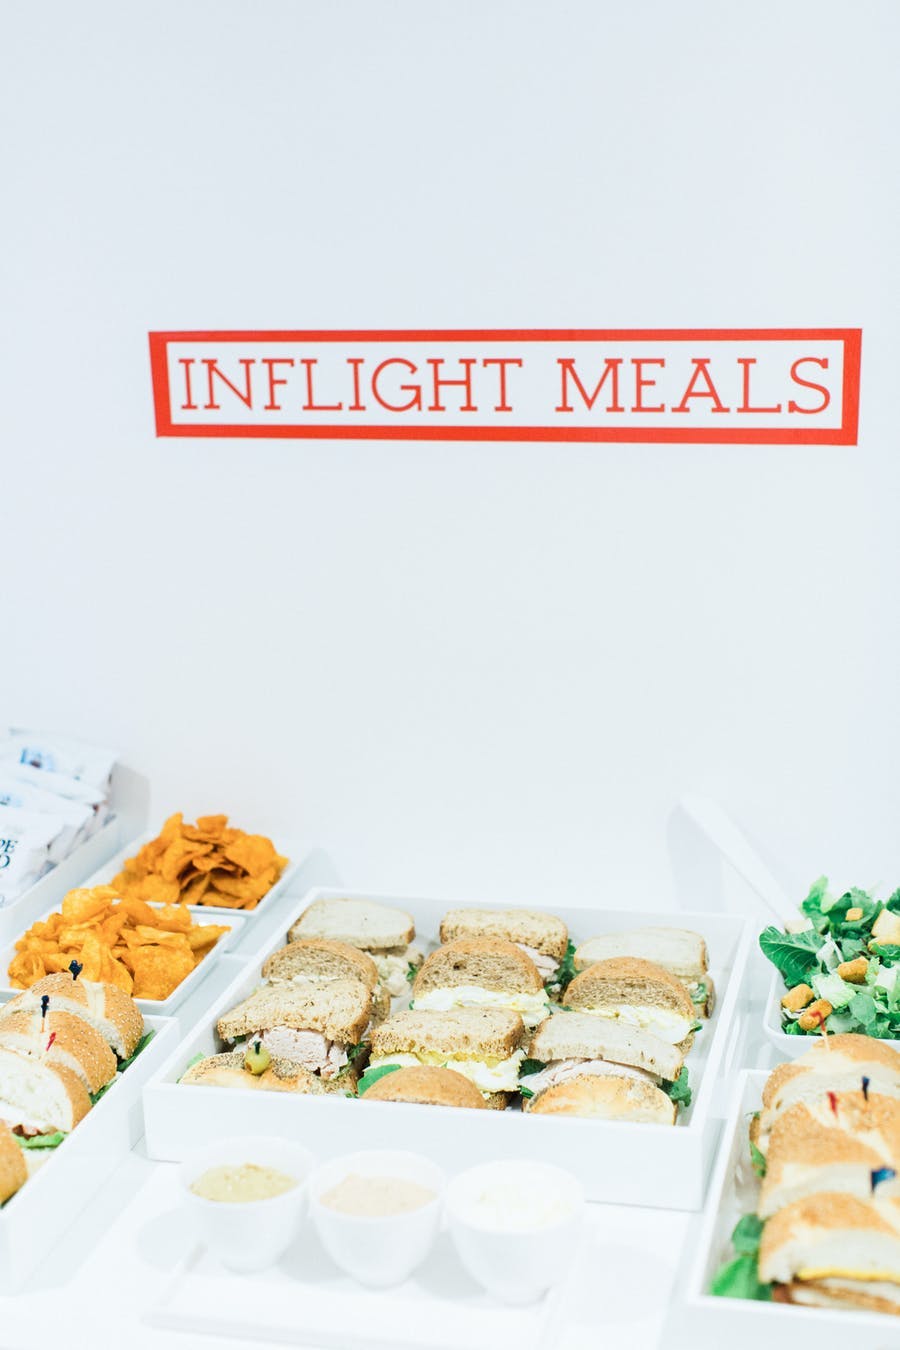 Sandwich display with an inflight meals label | PartySlate